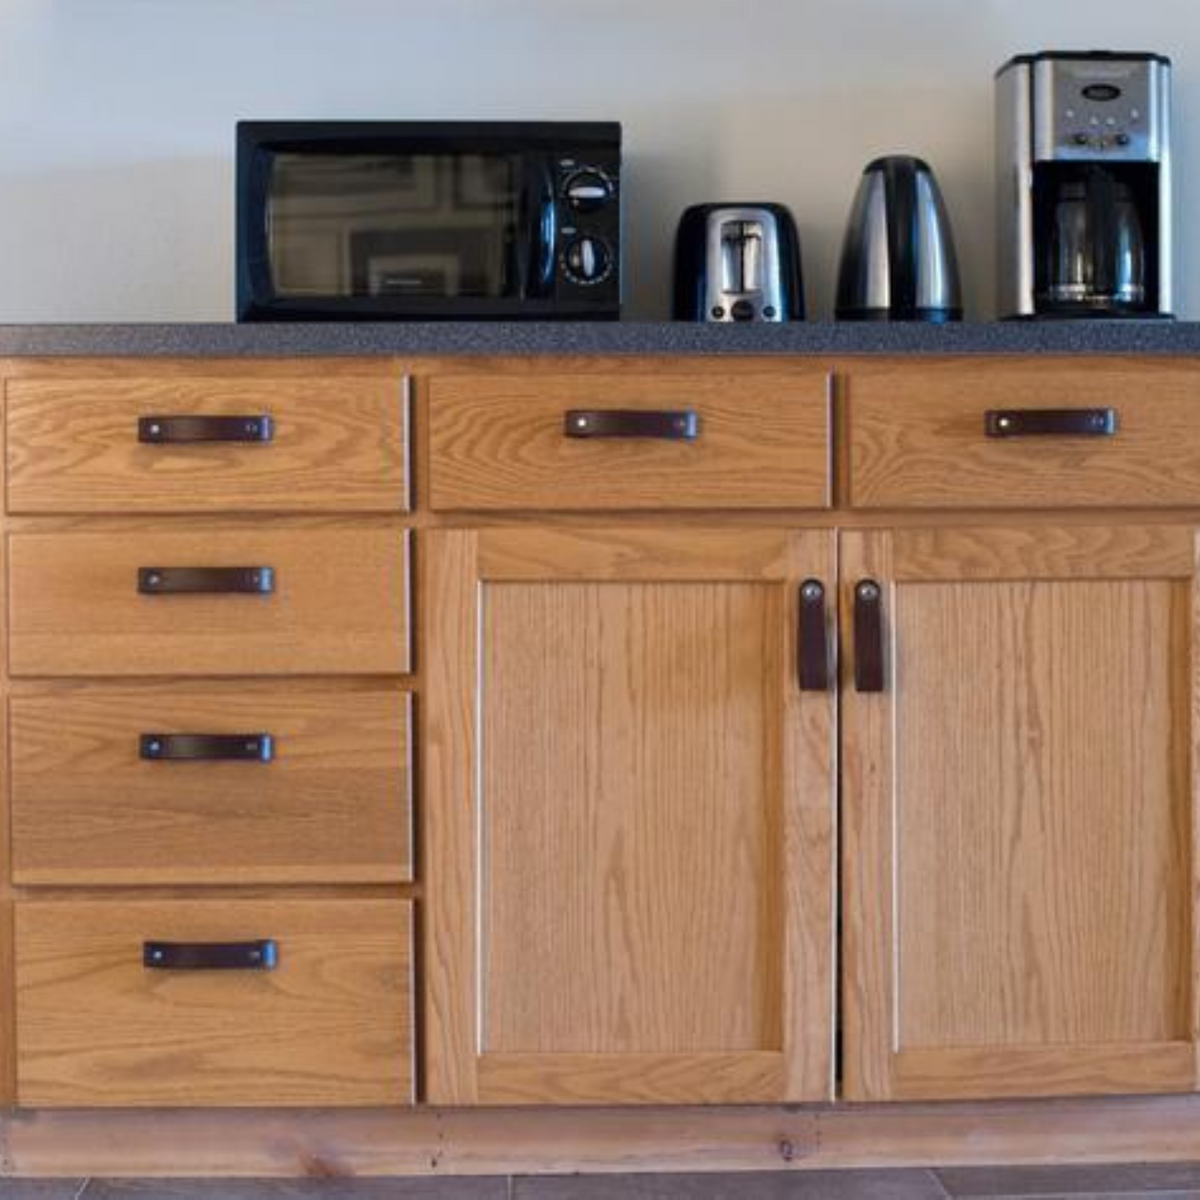 AirBnB kitchenette with oak wood cabinetry and dark brown leather handles.